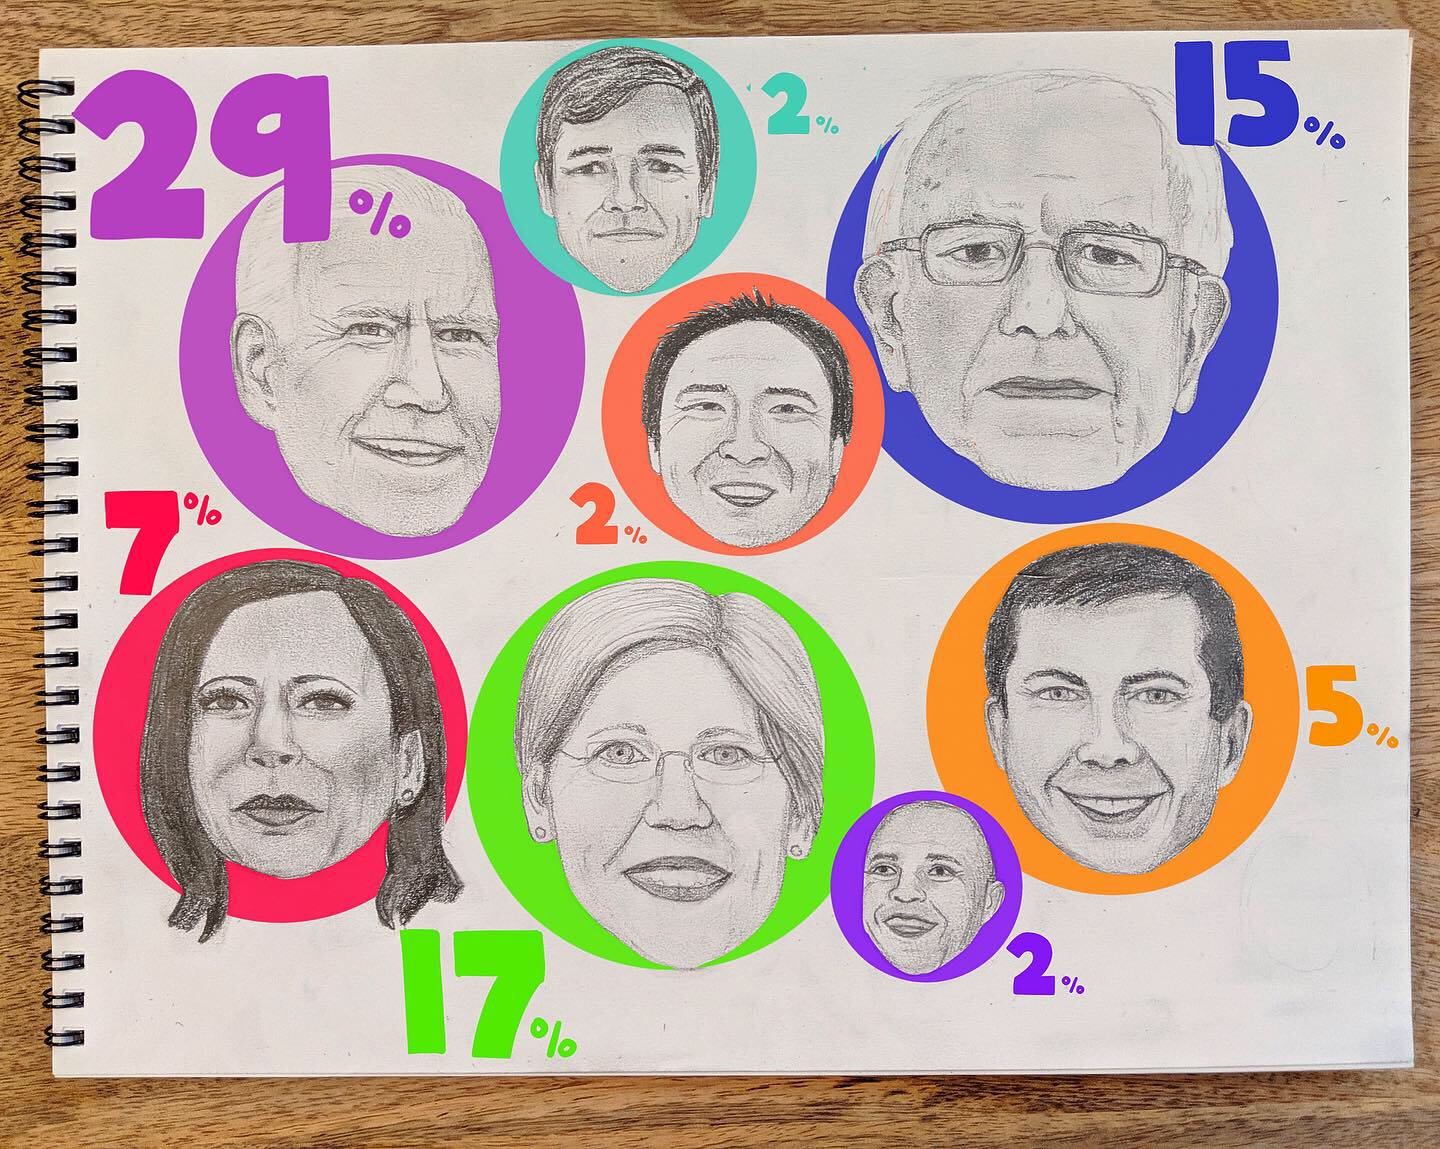 Sketch of democratic presidential candidates and their poll rankings sept 2019